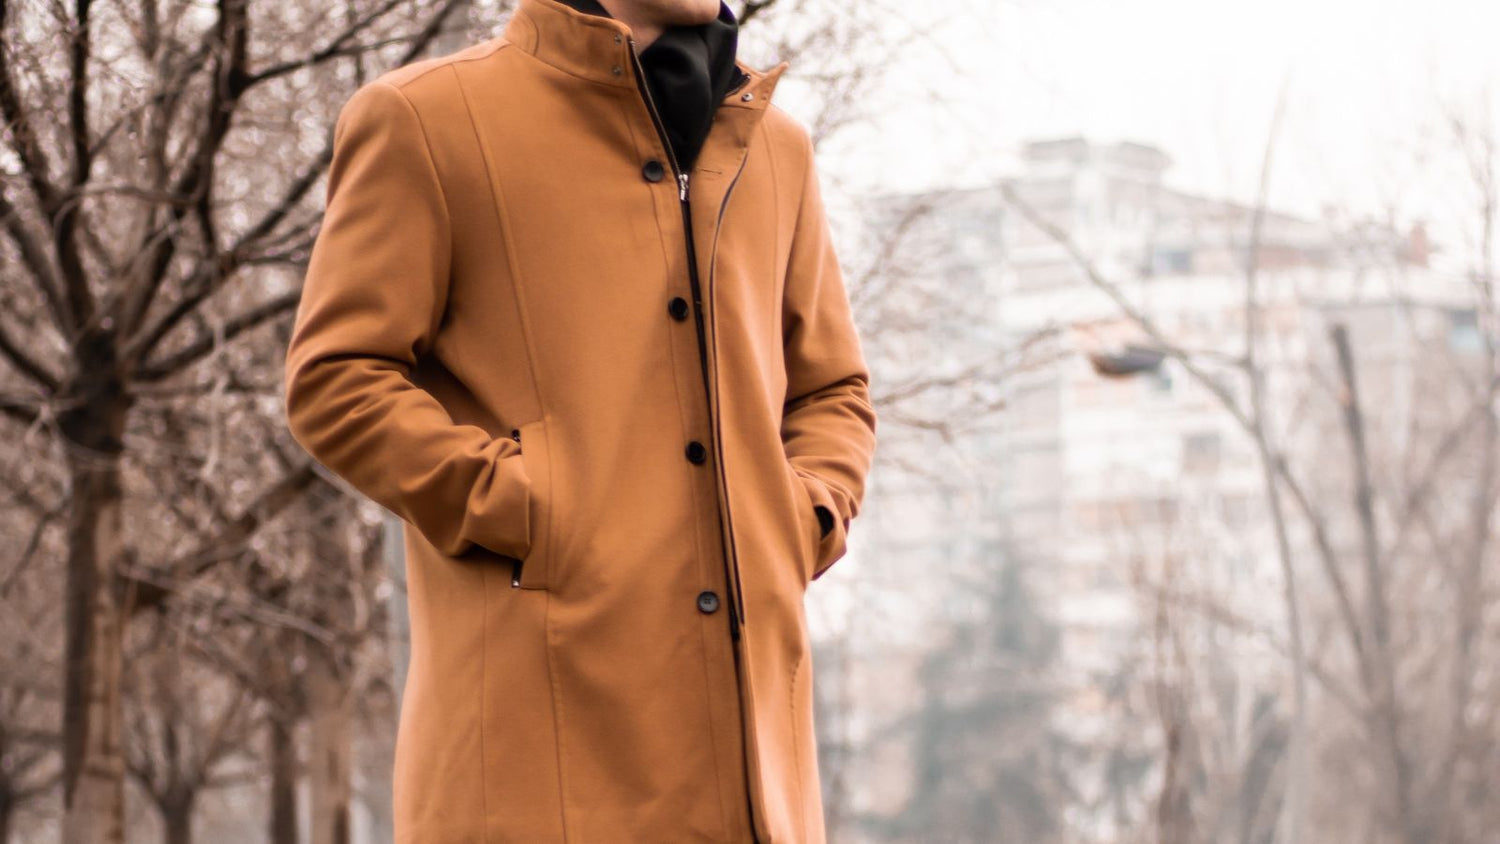 Shop men's designer coats and jackets online at discounted prices from Moon Behind the Hill